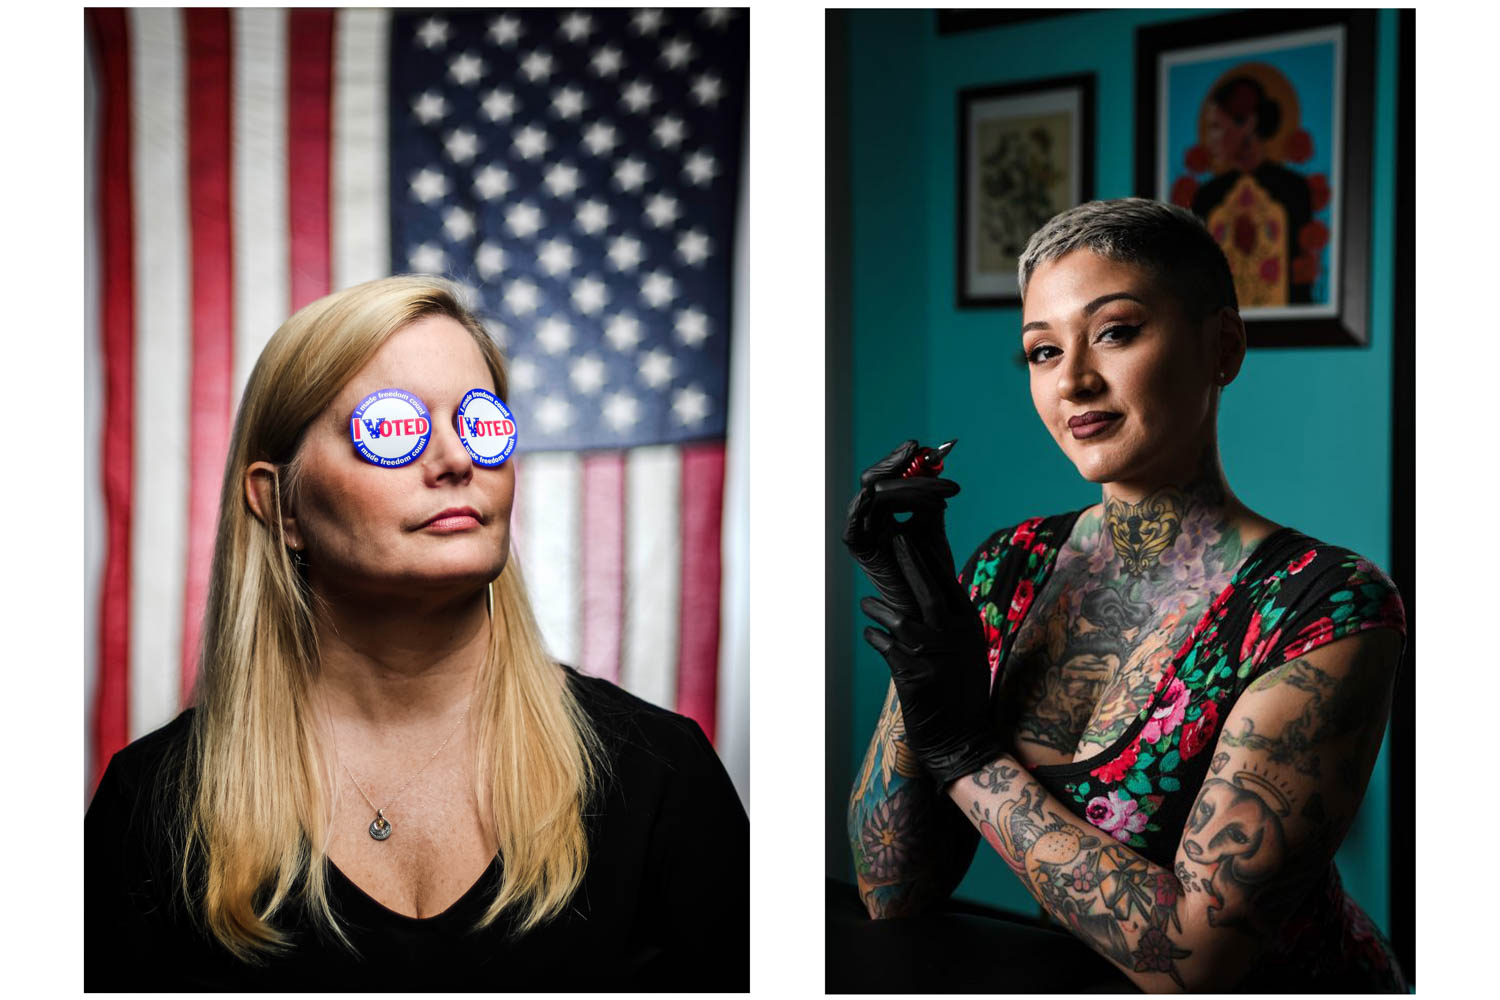 Voters Guide Cover with model Chris Cashion _________ Tattoo artist Chelsea 'Chewy' Soto in her studio for cover of QC@Work edition. 